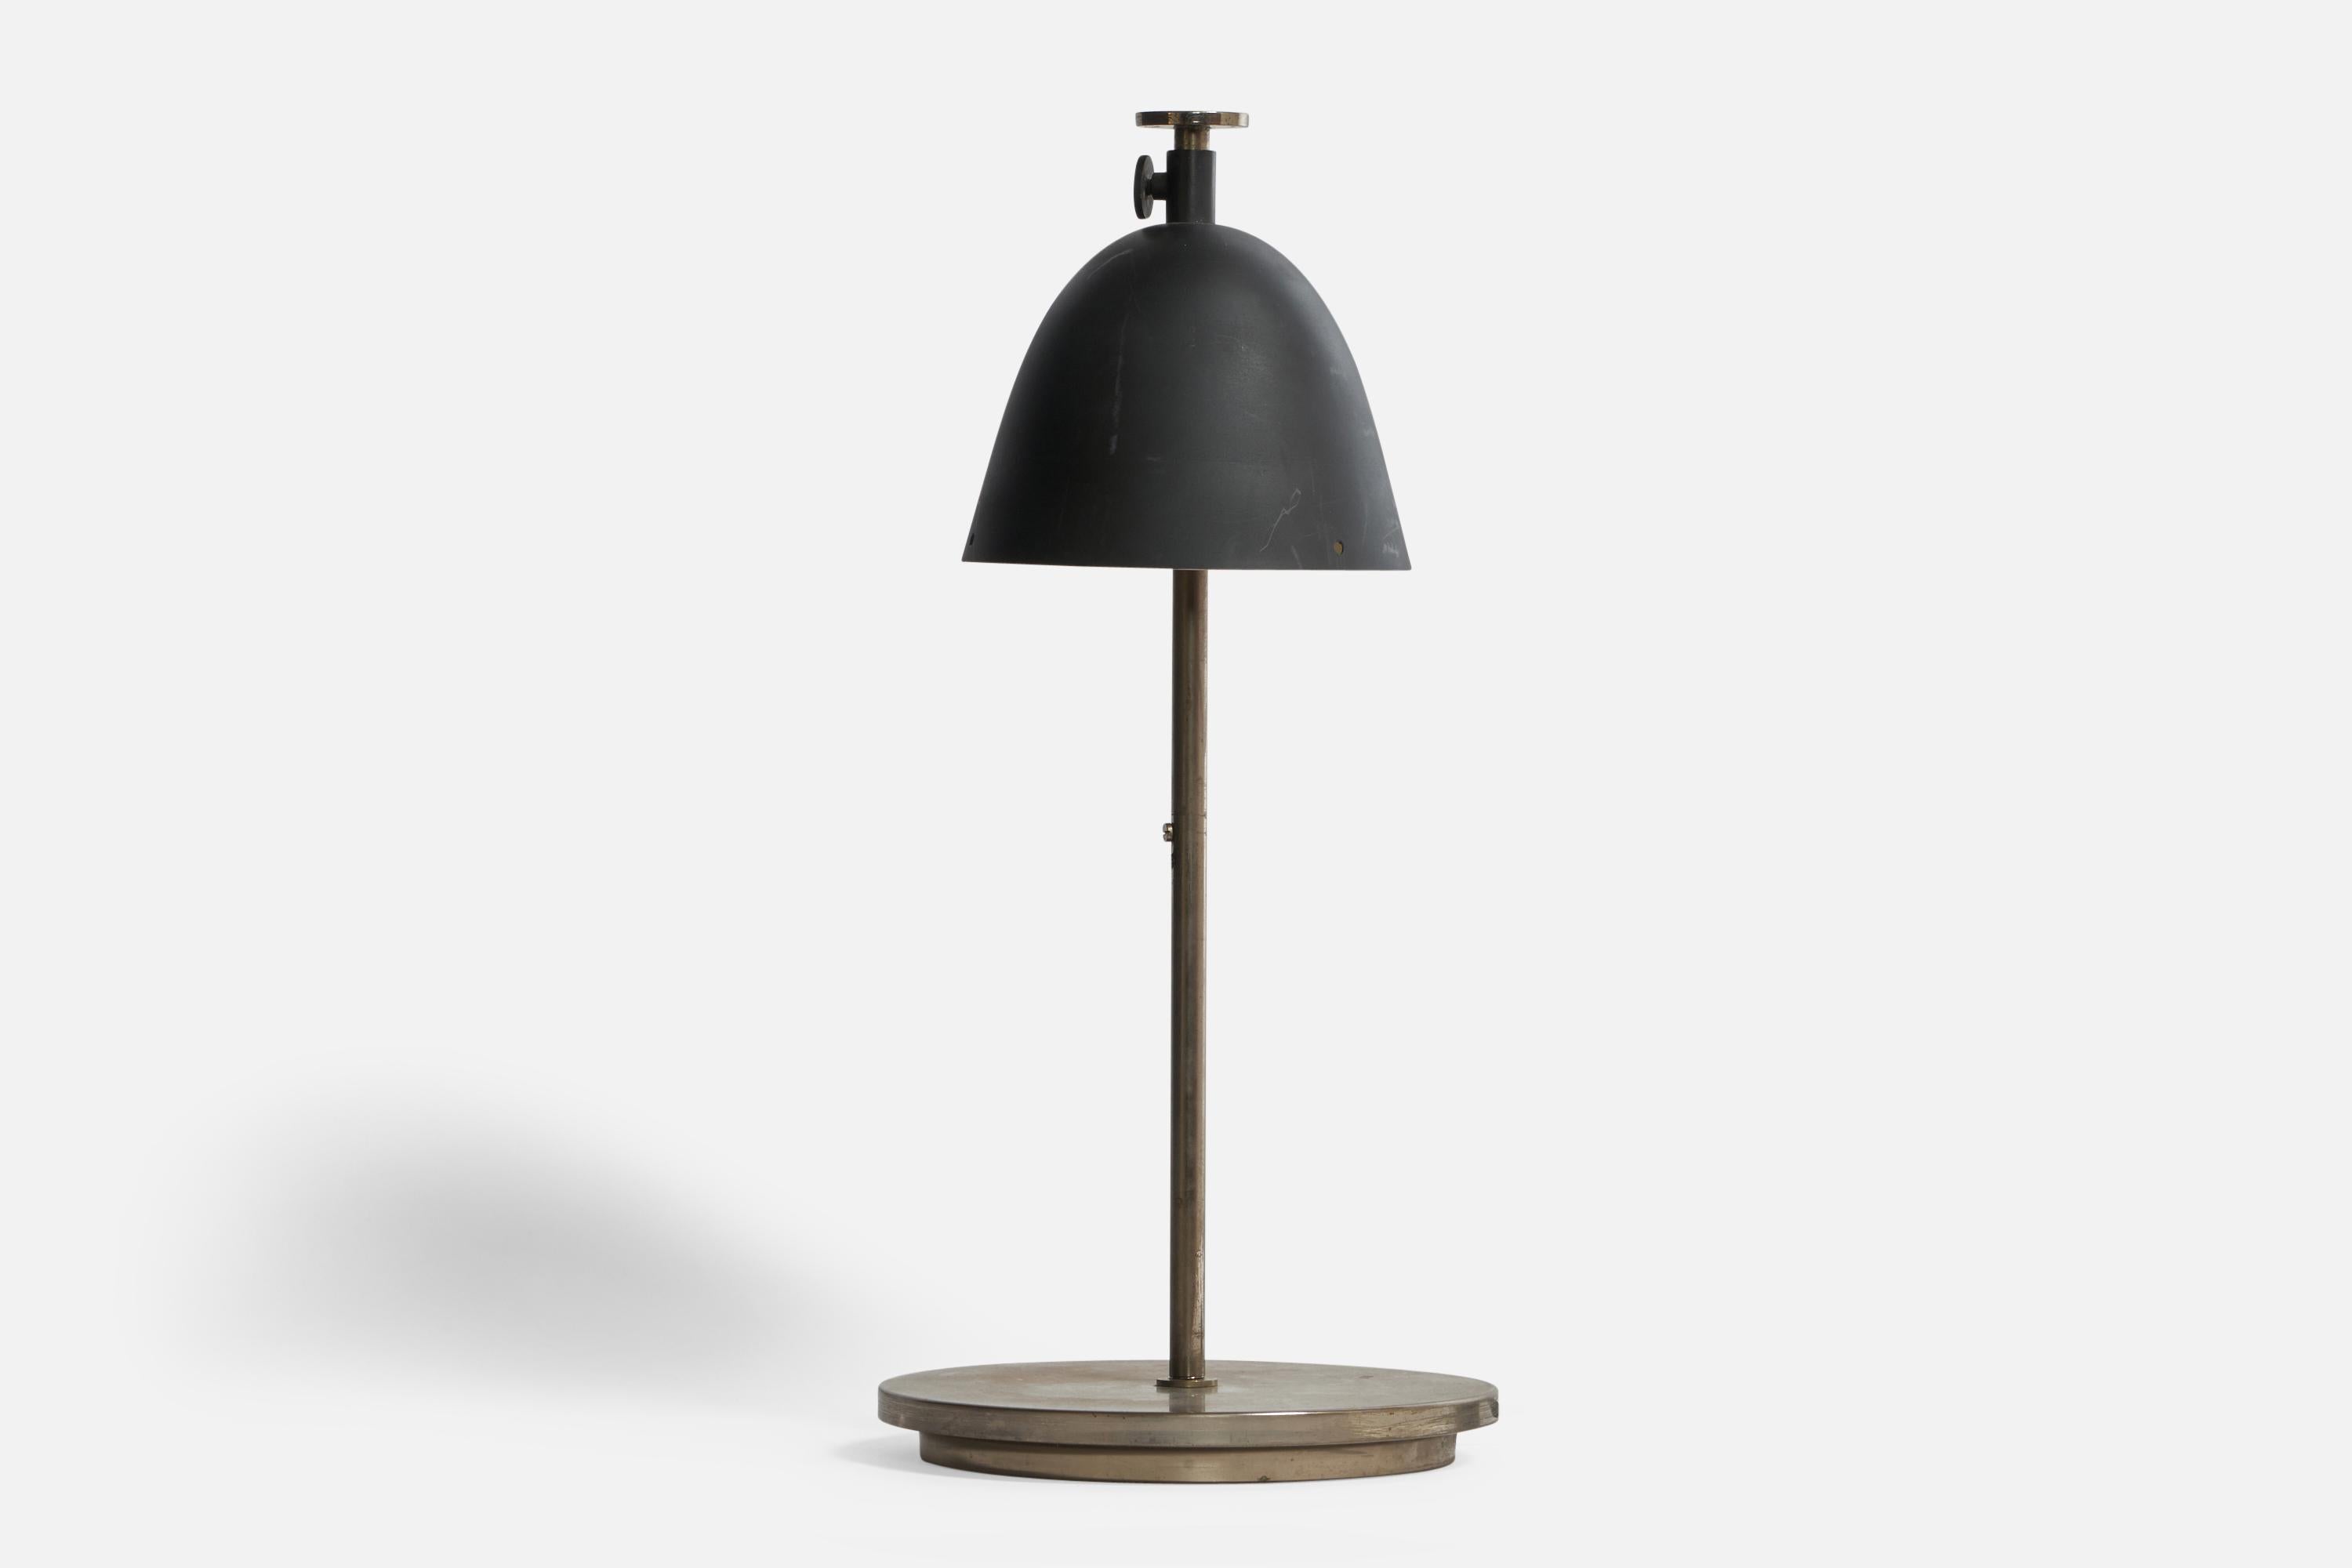 An adjustable black-lacquered metal and steel table lamp designed and produced in Italy, 1950s.

Overall Dimensions (inches): 19” H x 8.75” Diameter
Bulb Specifications: E-14 Bulb
Number of Sockets: 1
All lighting will be converted for US usage. We